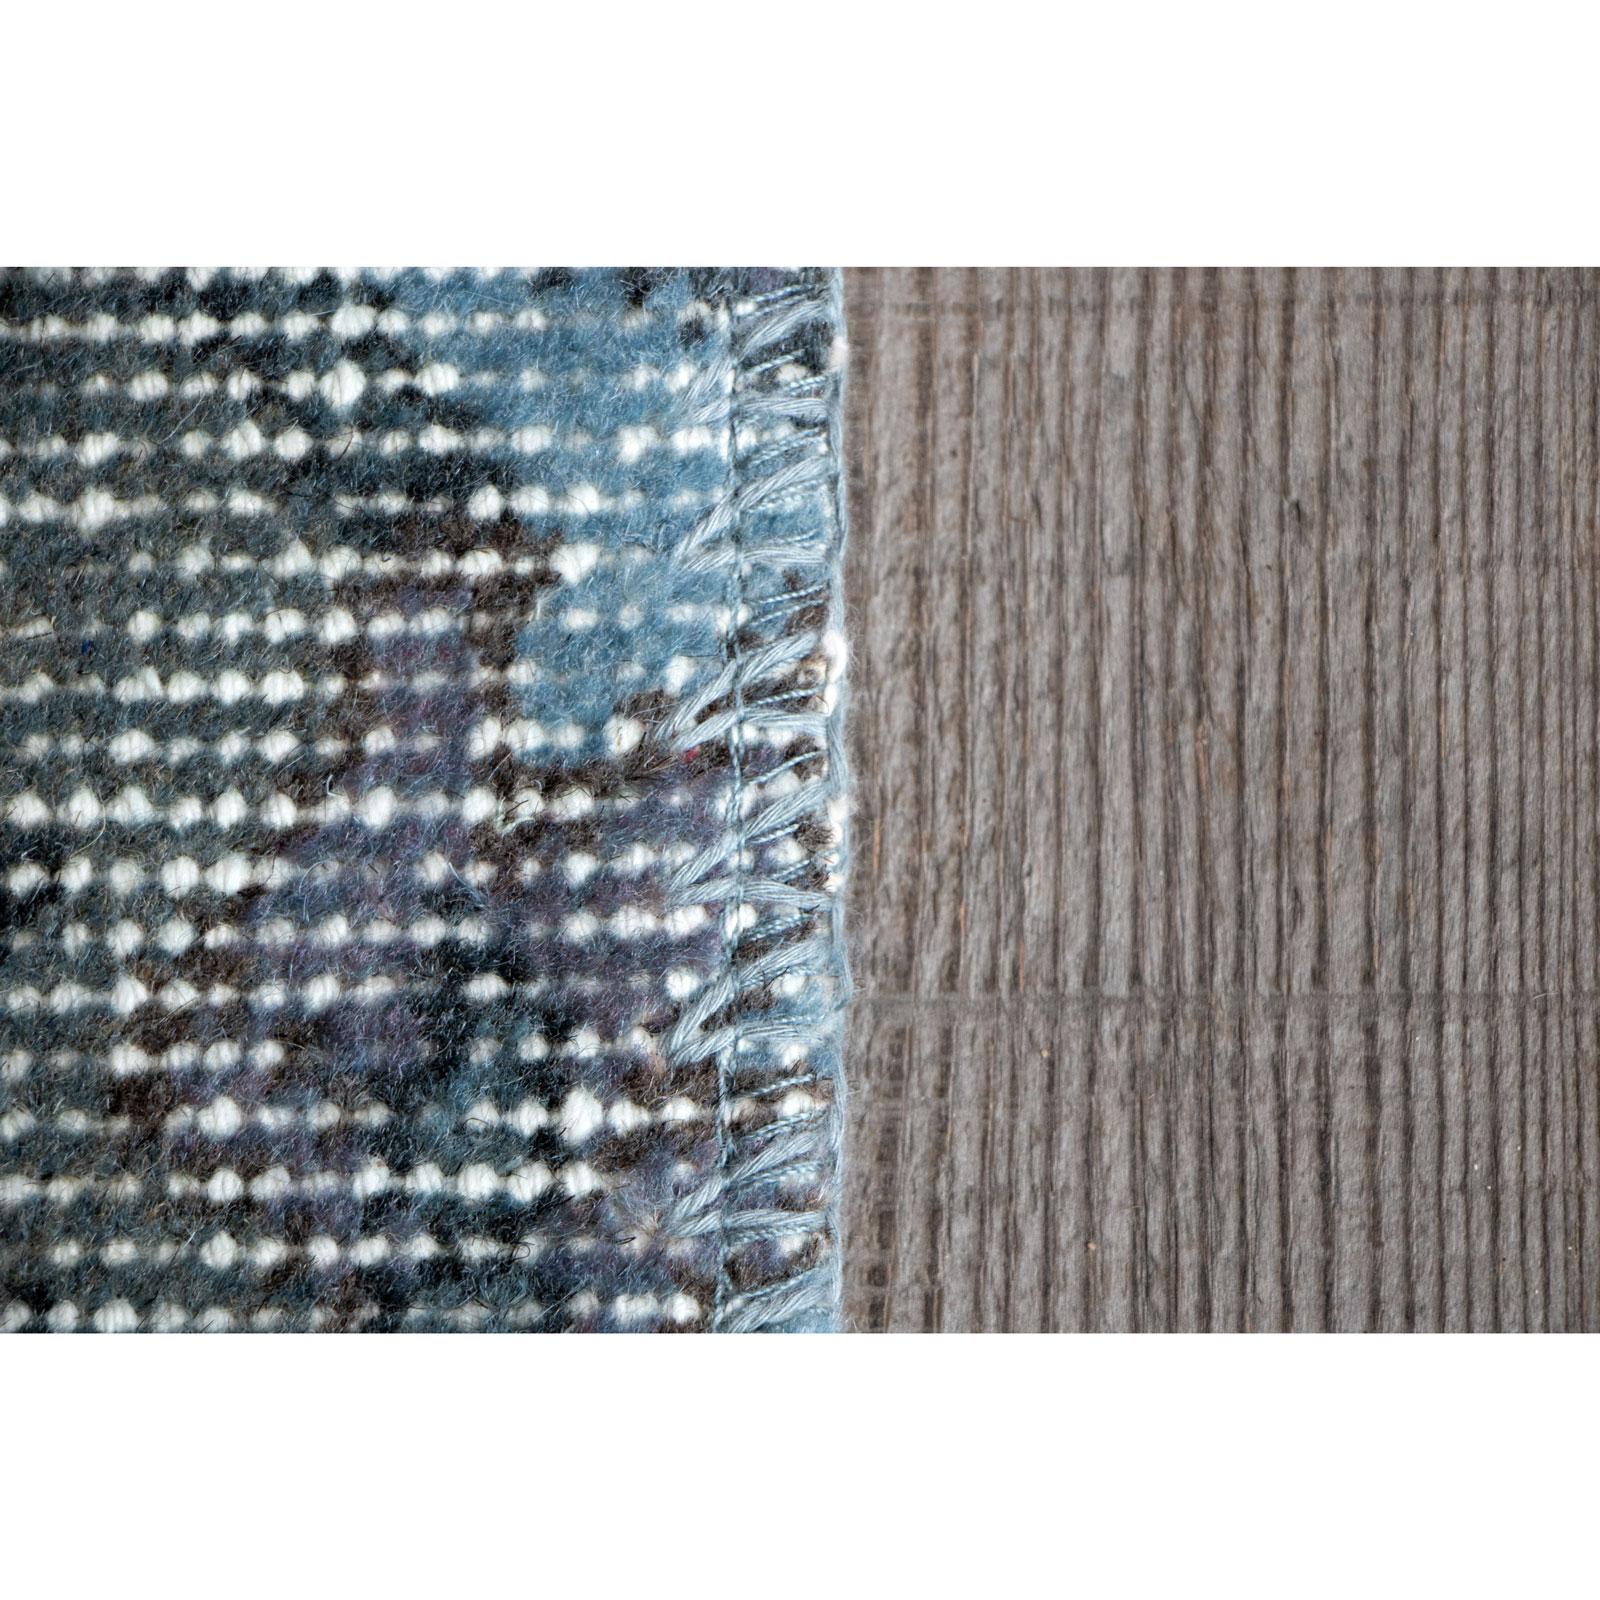 Antique Chic Vintage Blue Brown Wool Cotton Rug by Deanna Comellini 250x350 cm For Sale 6